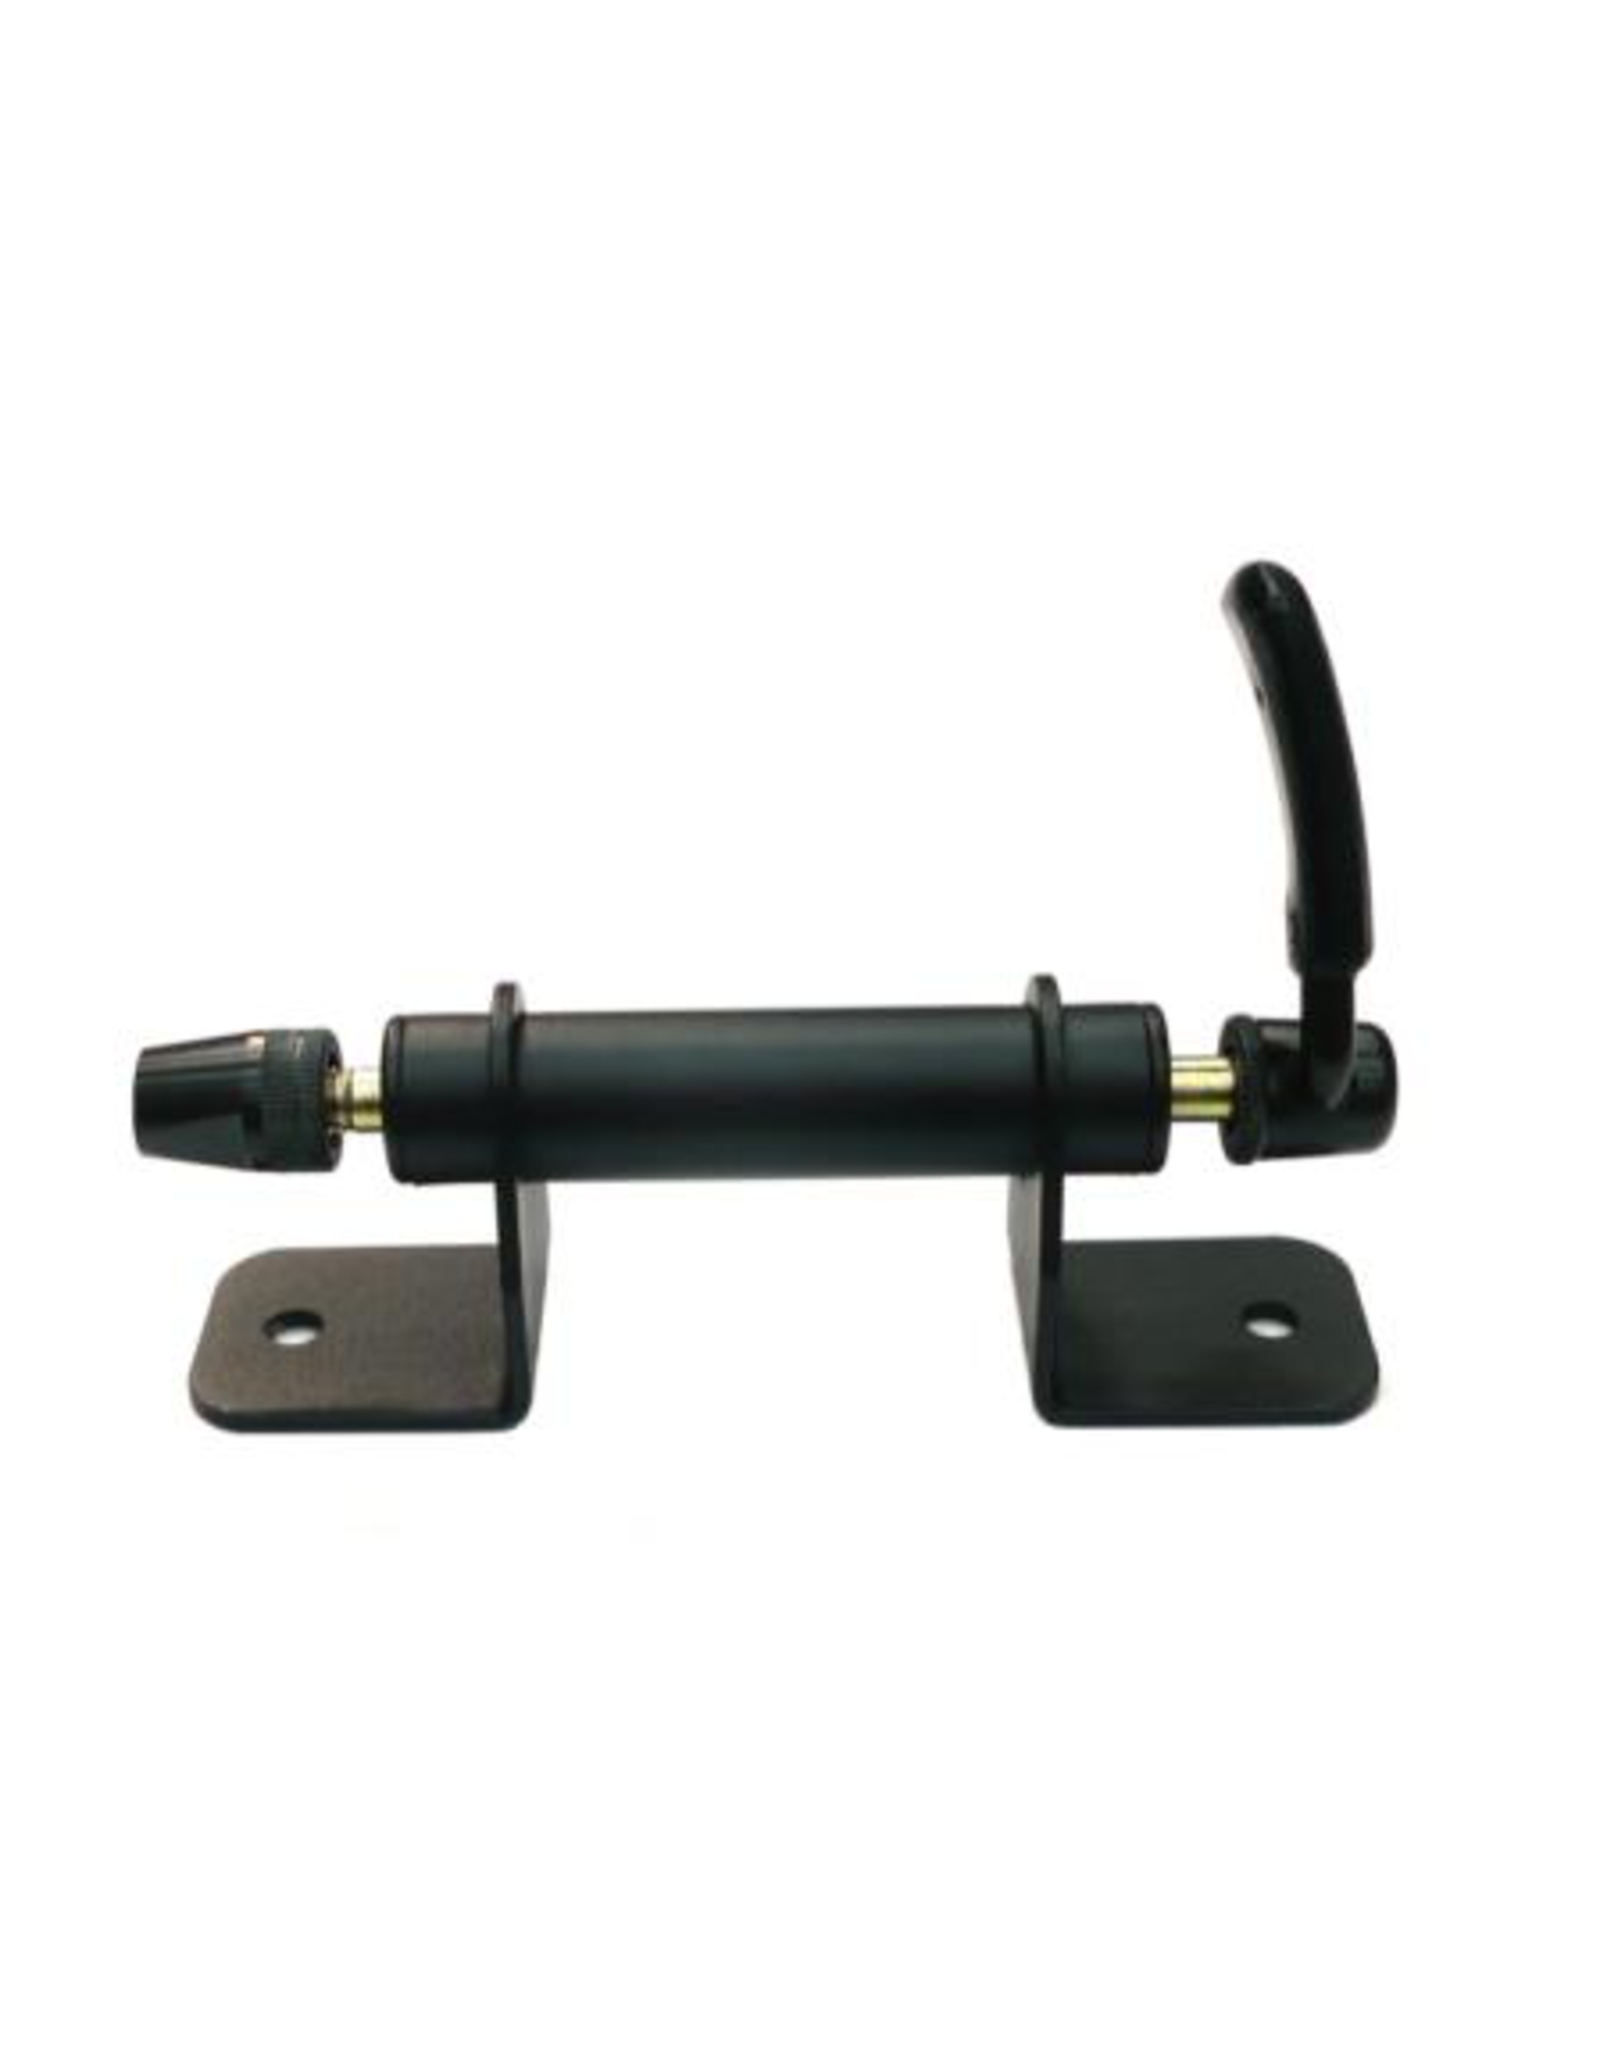 PRO SERIES TRAILER/UTE 9MM QR AXLE FORK MOUNT ANCHOR POINT